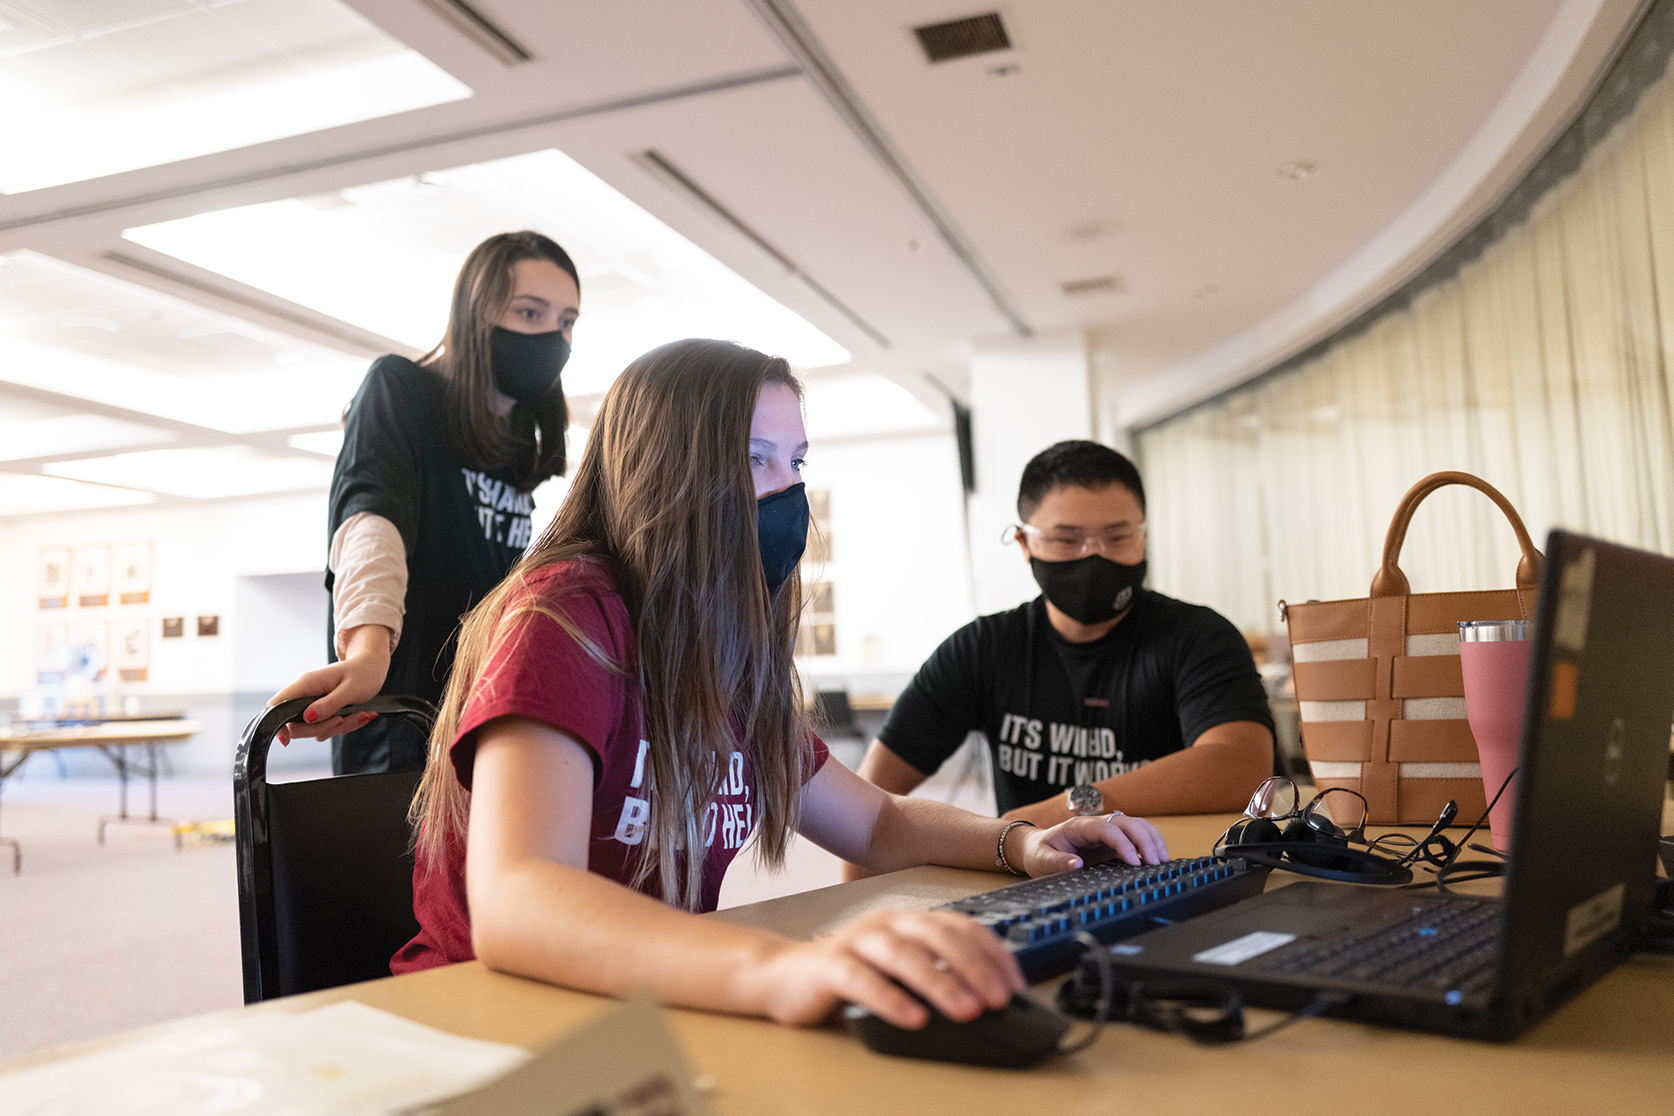 Students wearing masks work on a computer together